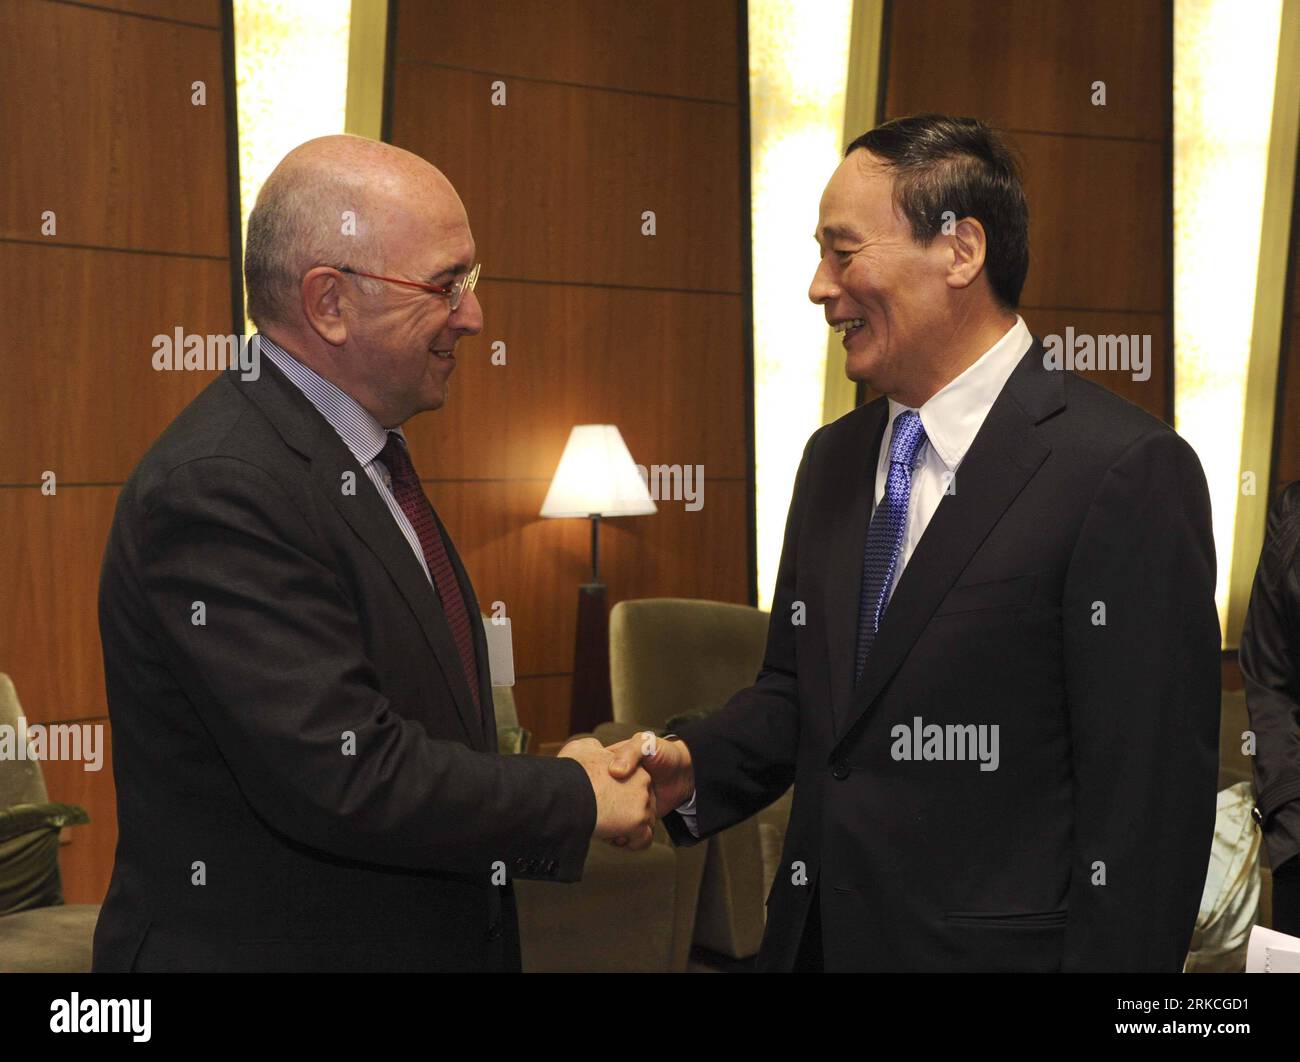 Bildnummer: 54762912  Datum: 21.12.2010  Copyright: imago/Xinhua (101221) -- BEIJING, Dec. 21, 2010 (Xinhua) -- Chinese Vice Premier Wang Qishan (R) shakes hands with European Commission Vice President in charge of competition policy Joaquin Almunia before the Third China-EU High Level Economic and Trade Dialogue in Beijing, capital of China, Dec. 21, 2010. The dialogue is co-chaired by Chinese Vice Premier Wang Qishan and European Commission Vice President in charge of competition policy Joaquin Almunia, Trade Commissioner Karel De Gucht as well as Commissioner for Economic and Monetary Affai Stock Photo